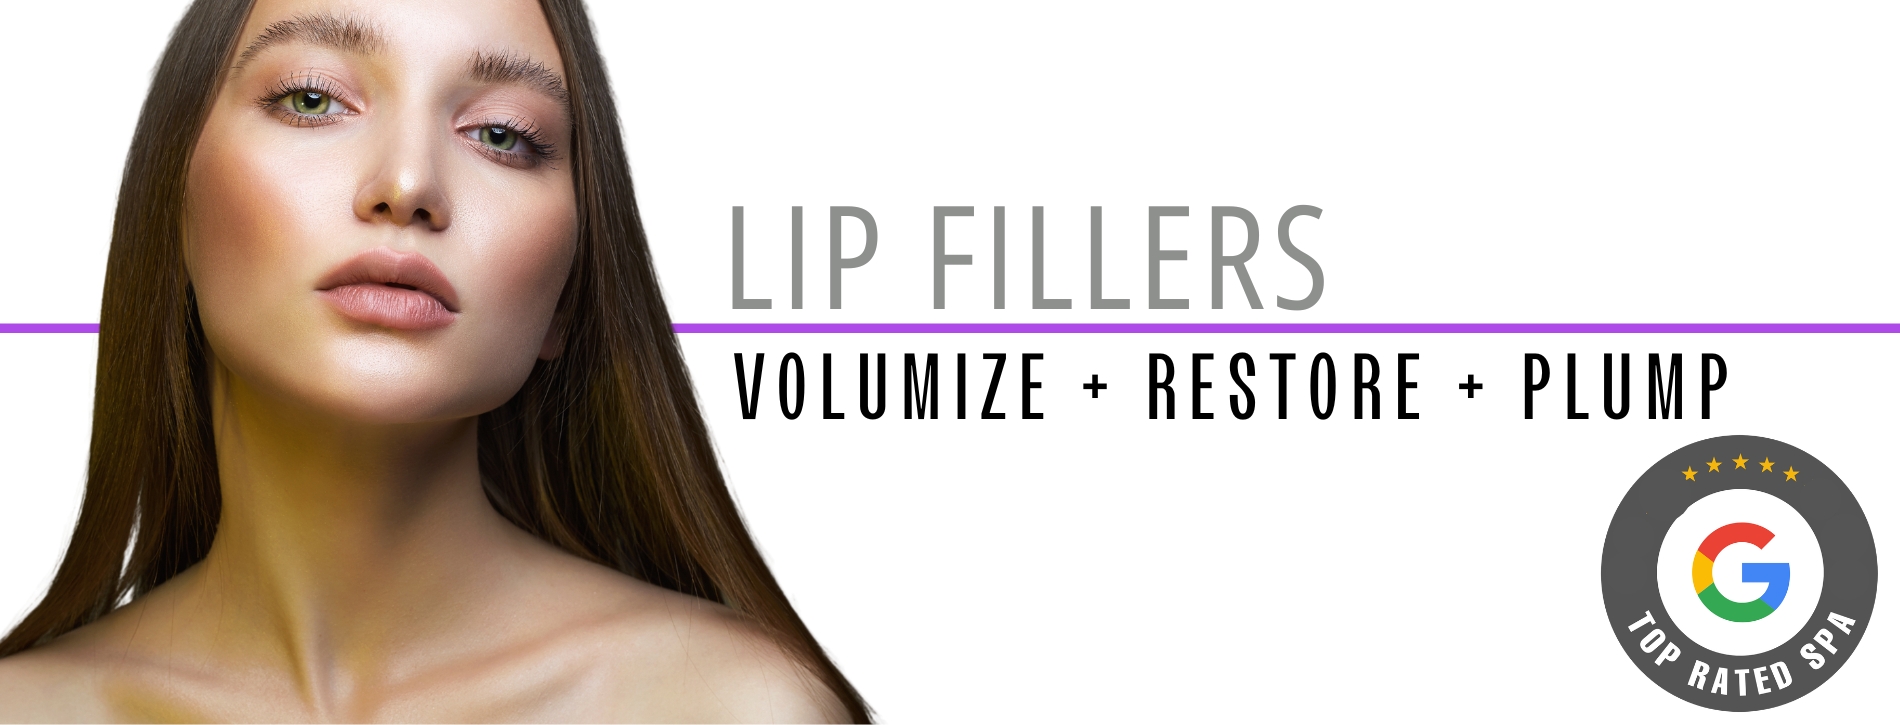 A Hero image featuring a beautiful woman with beautiful lips with words "Lip fillers: Volumize, Restore, and Plump".